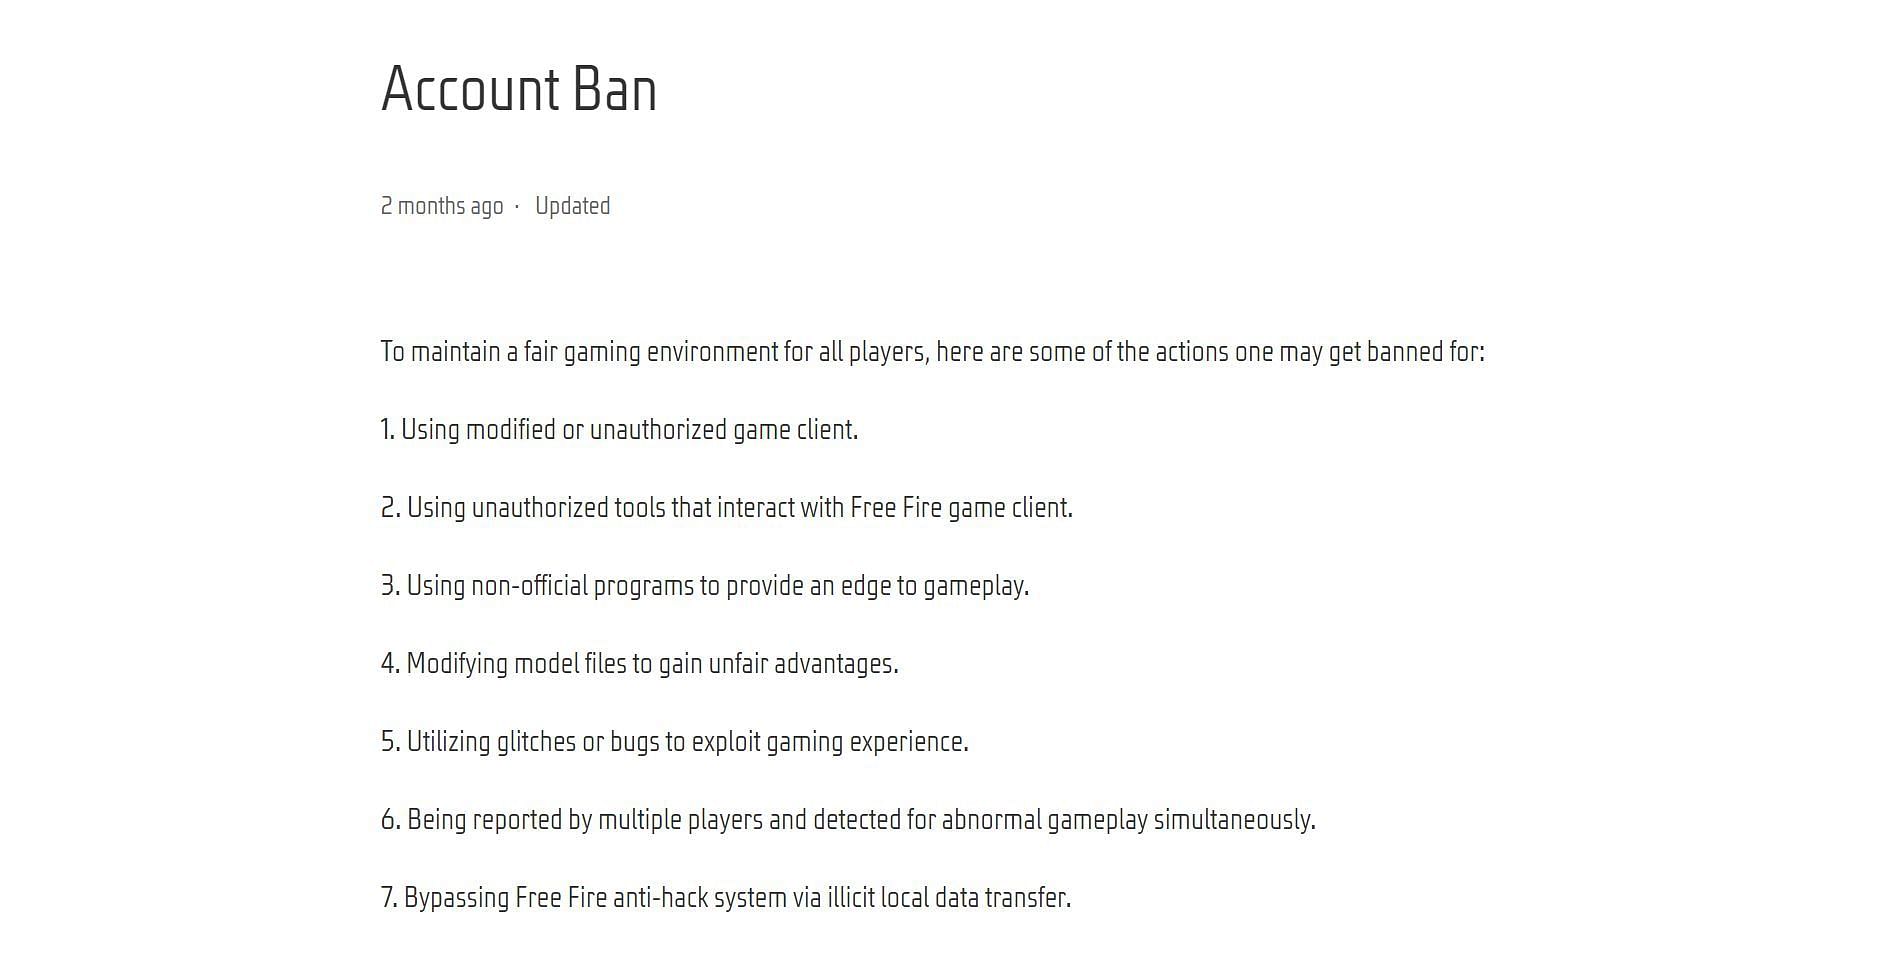 List of reasons which can get players banned (Image via Garena)